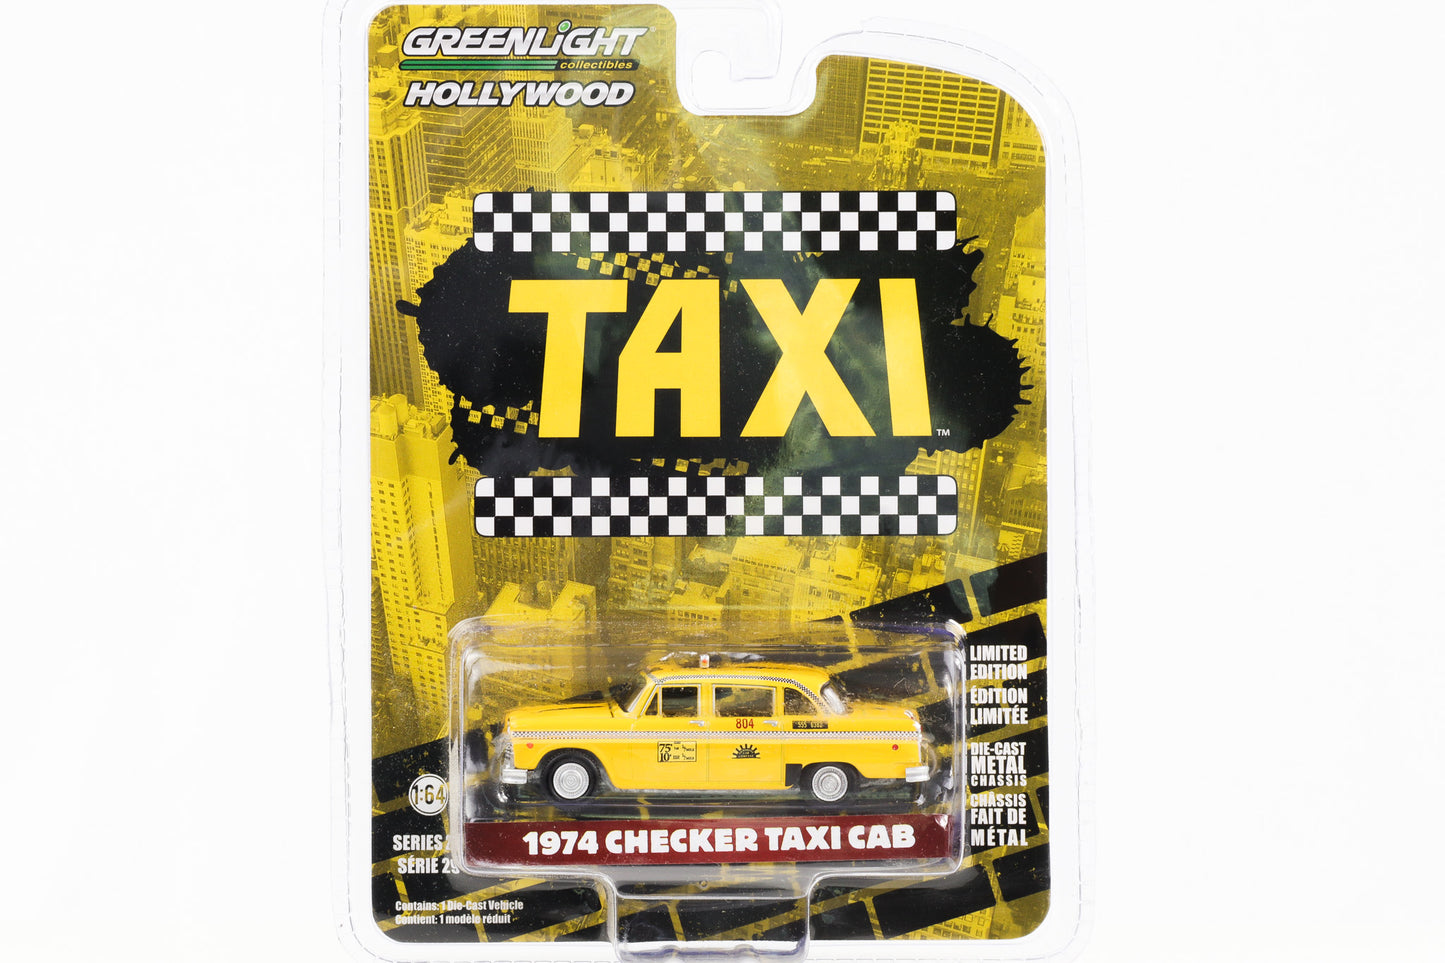 1:64 TV Show Taxi - 1974 Checker Taxi CAB yellow Greenlight Hollywood